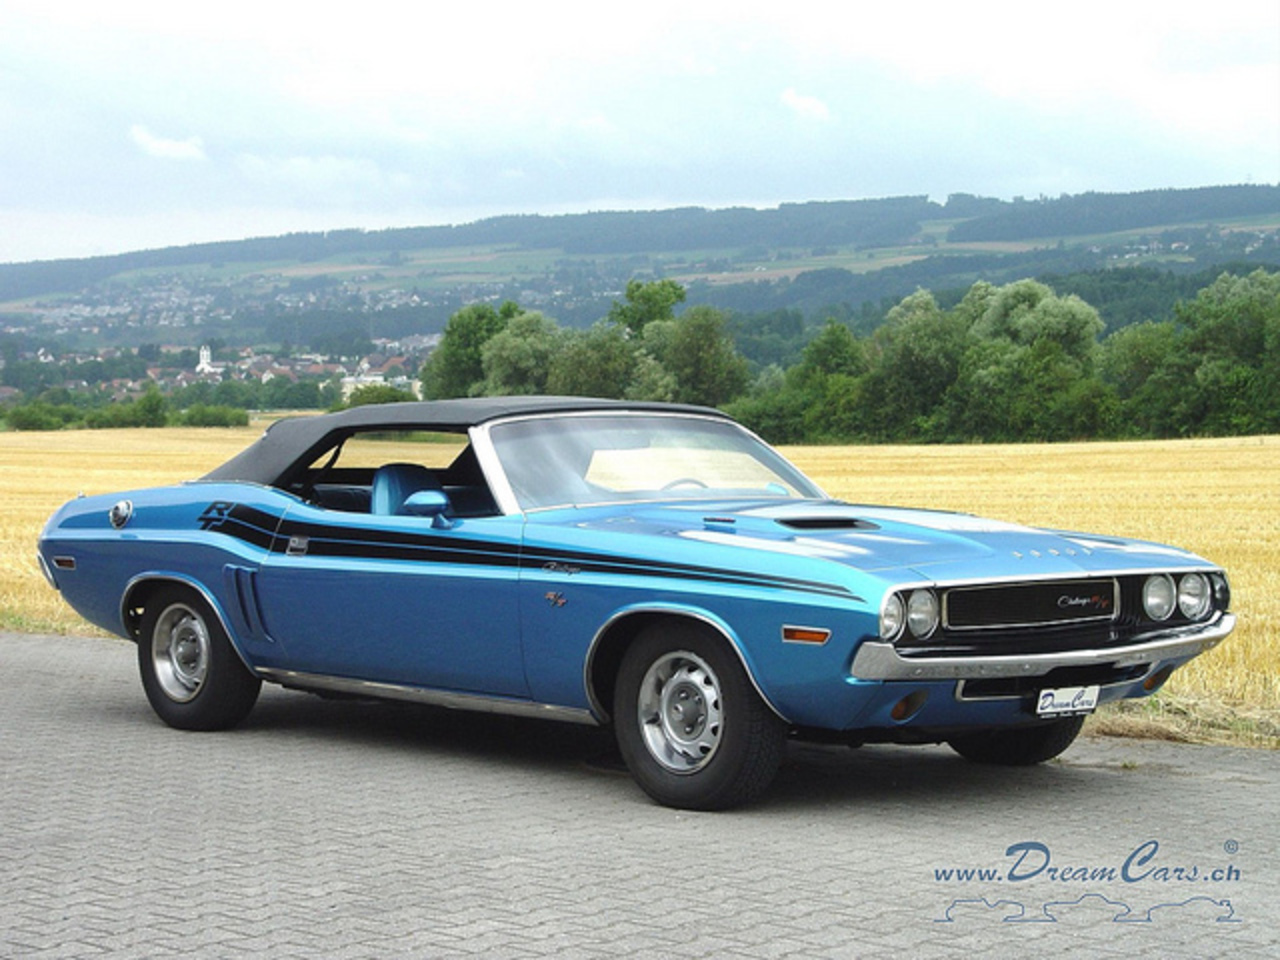 Dodge-Challenger-RT-Convertible-1970-15 | Flickr - Photo Sharing!